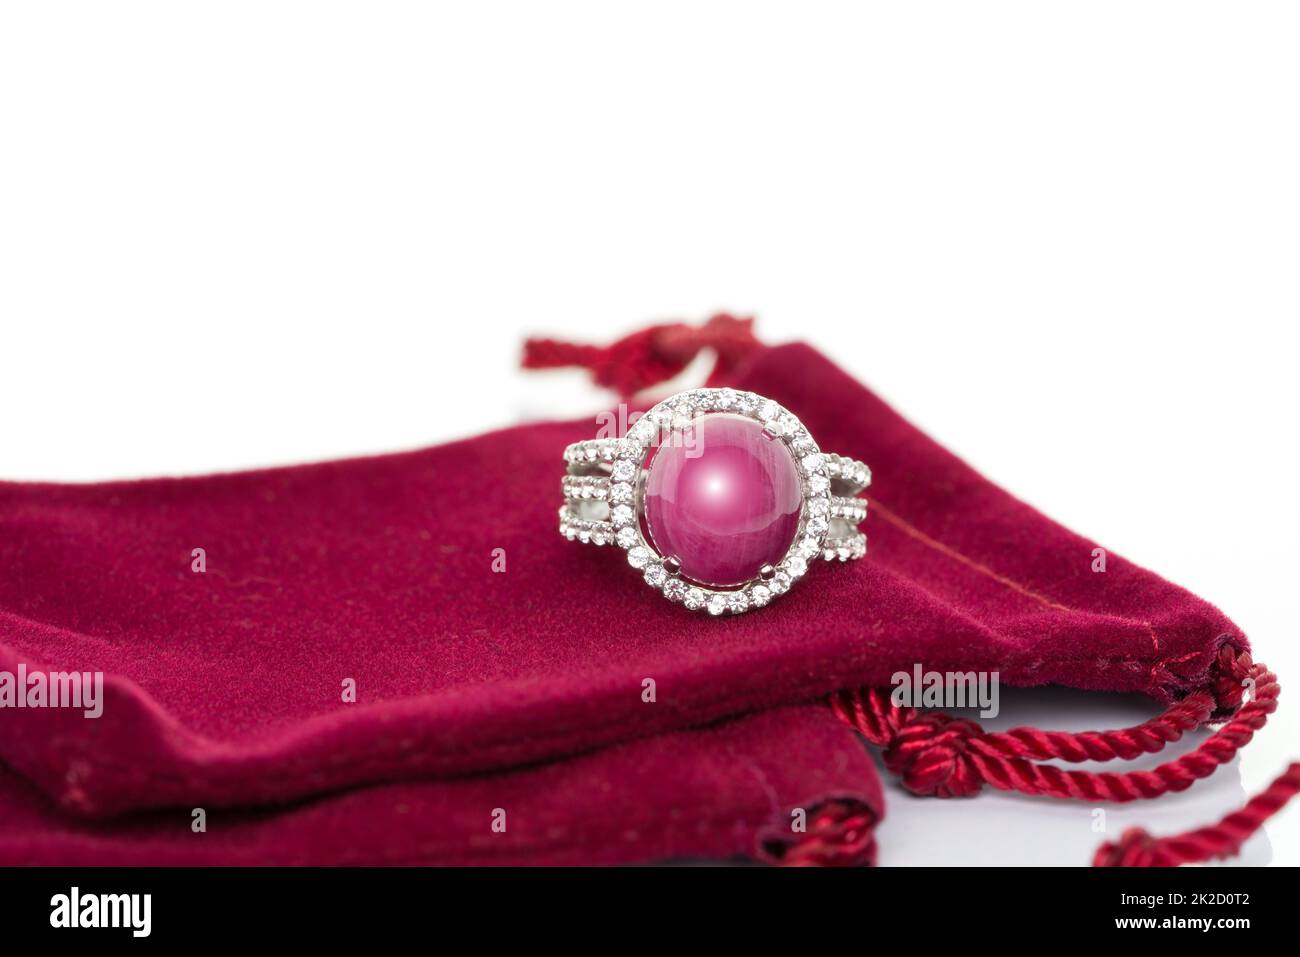 Ruby stone with diamonds ring on red velvet bag. Collection of natural gemstones accessories. Studio shot Stock Photo